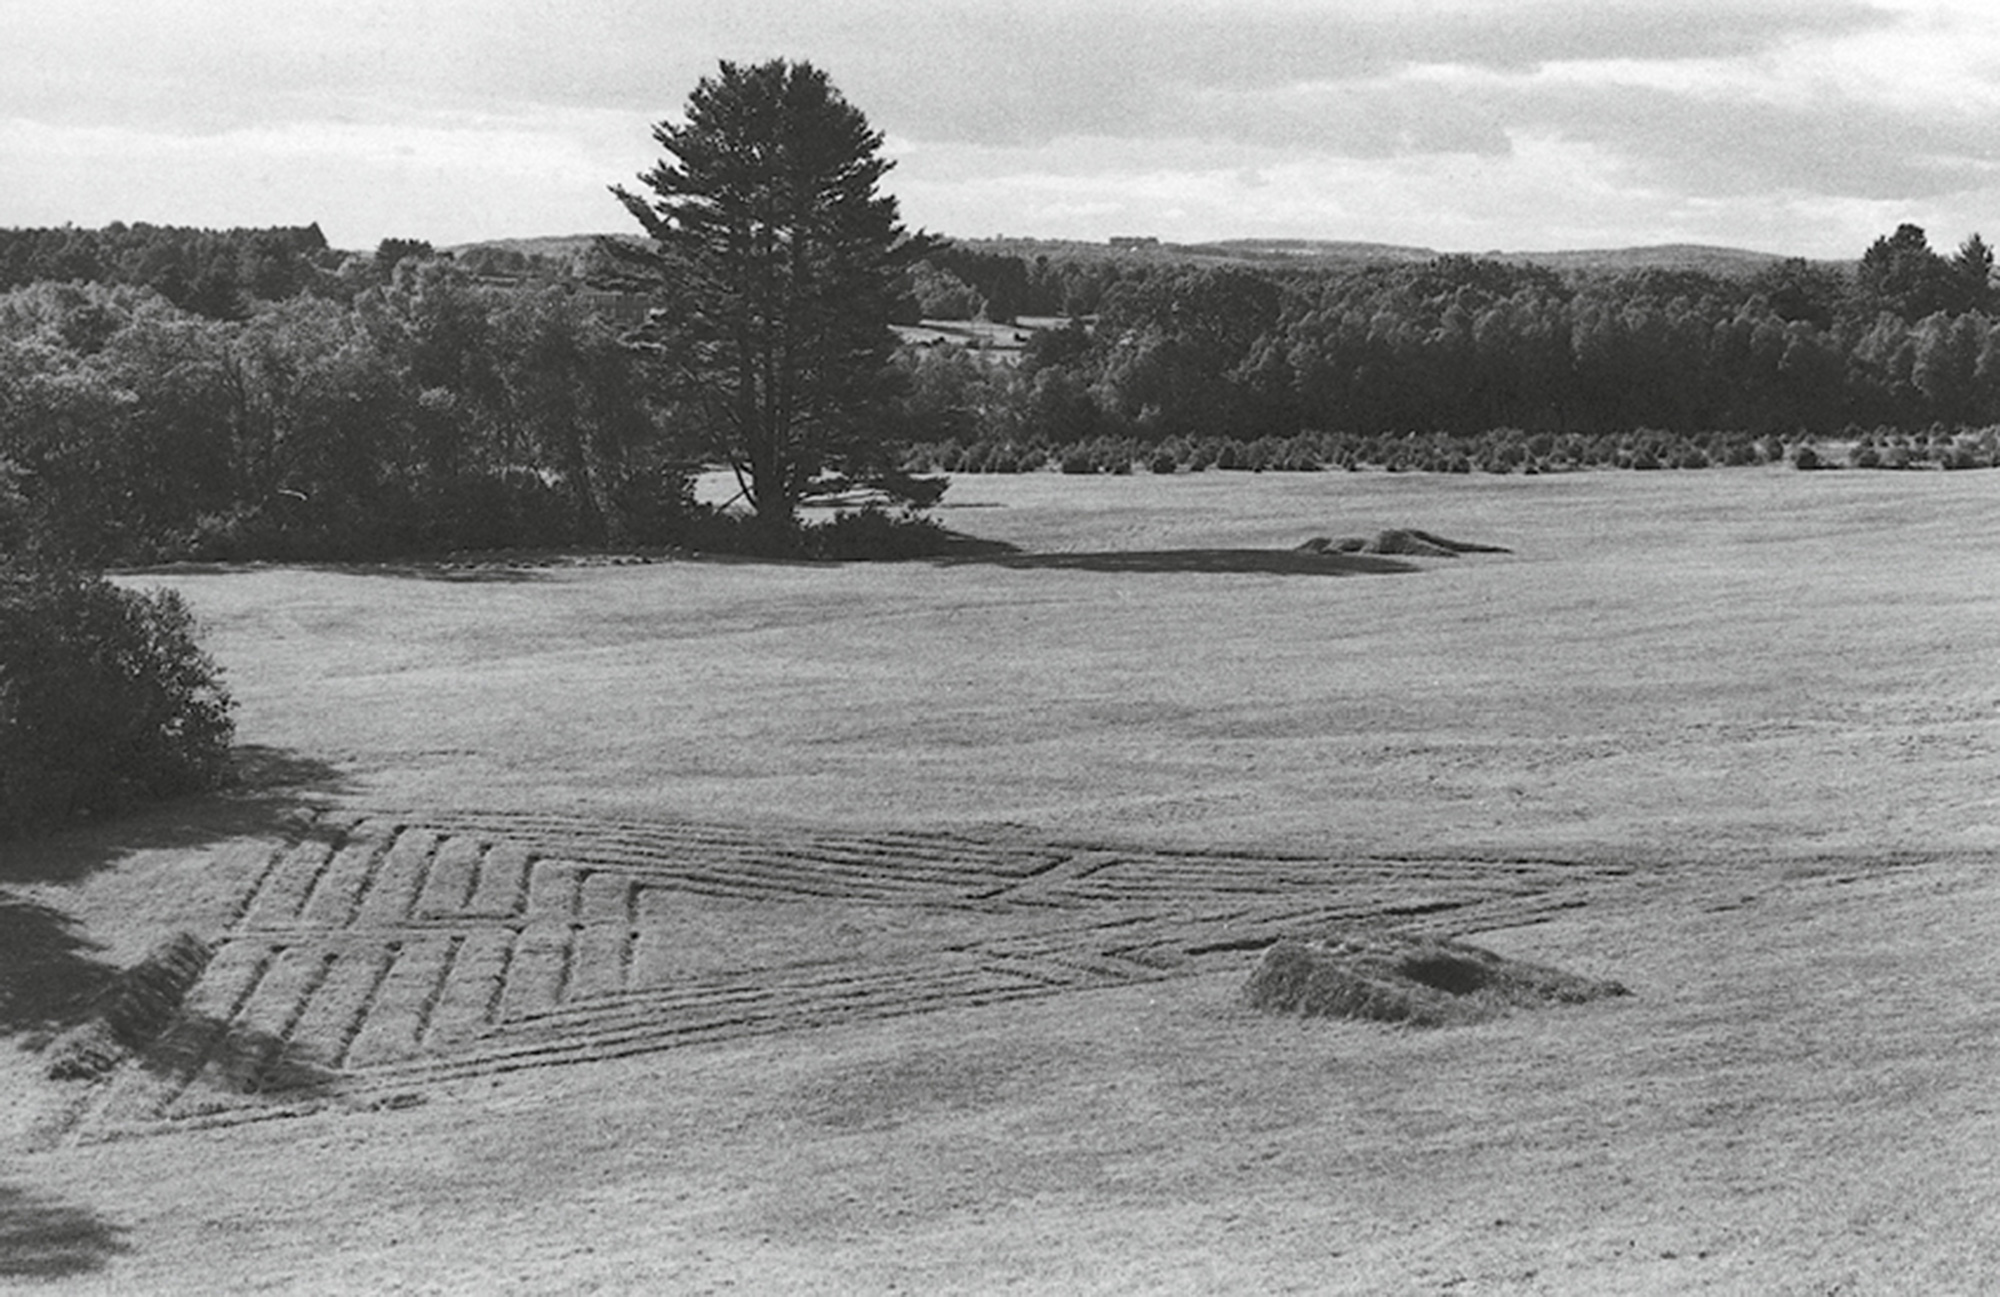 A photograph of Pratt Farm, with the nineteen seventy-four land artworks “Turf Maze” and “Observatory” in the foreground.